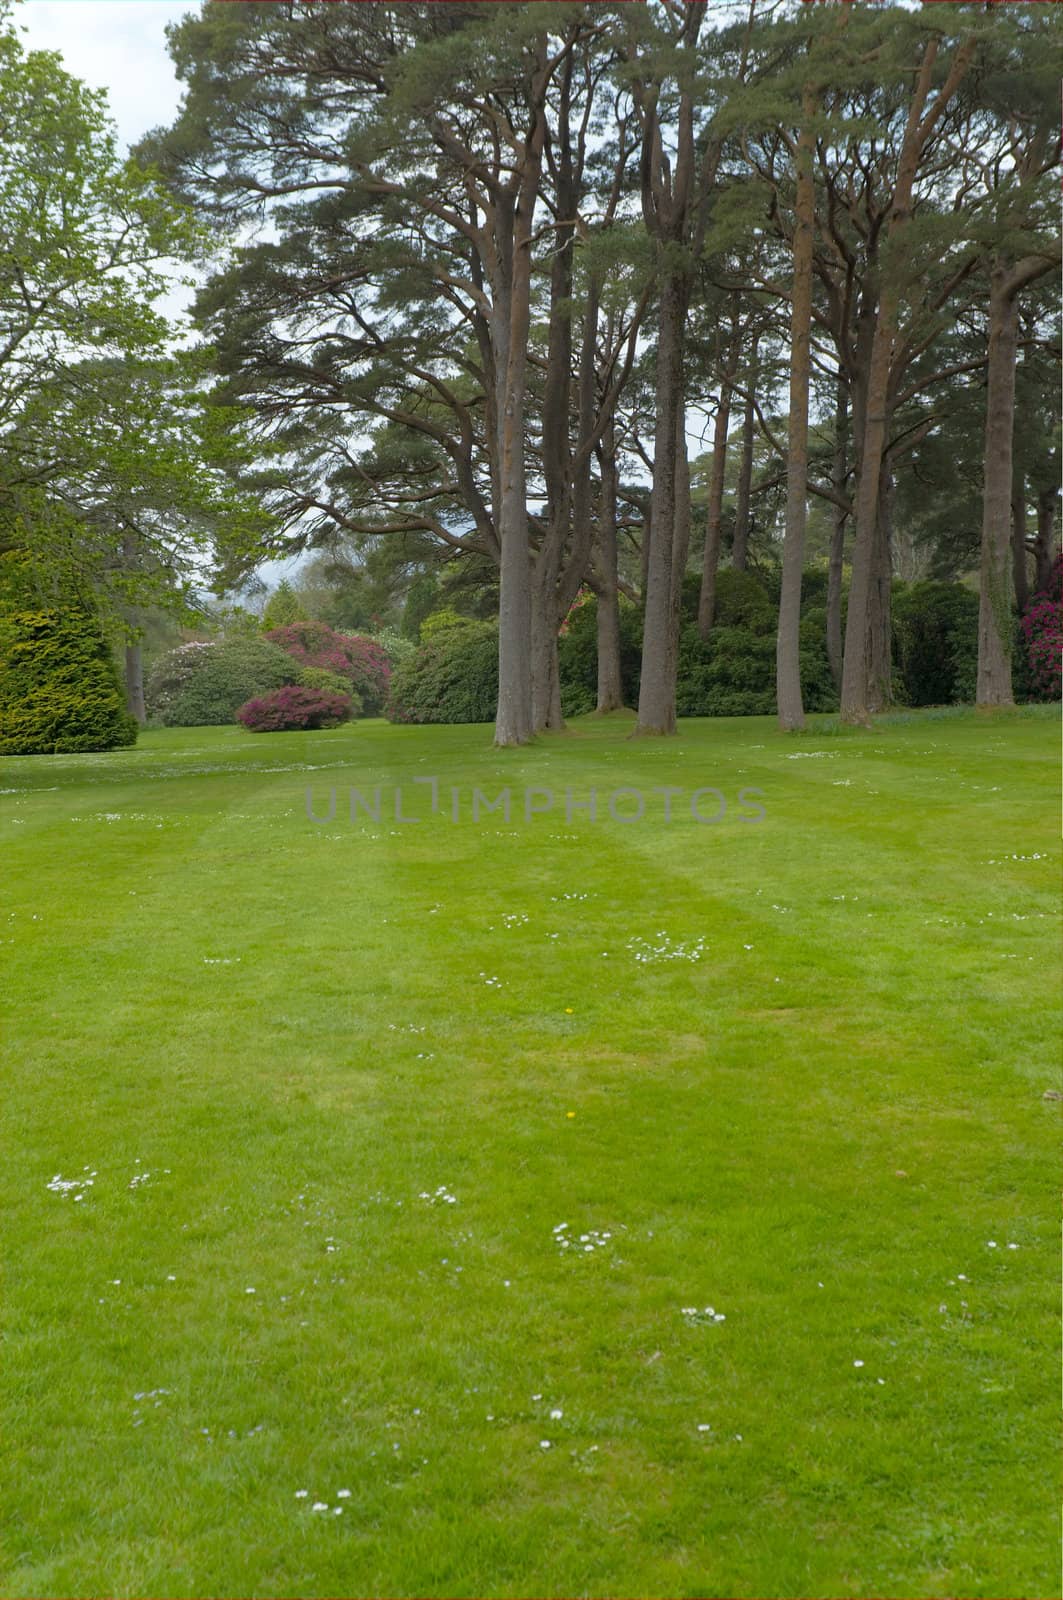 Lawn with trees by t3mujin